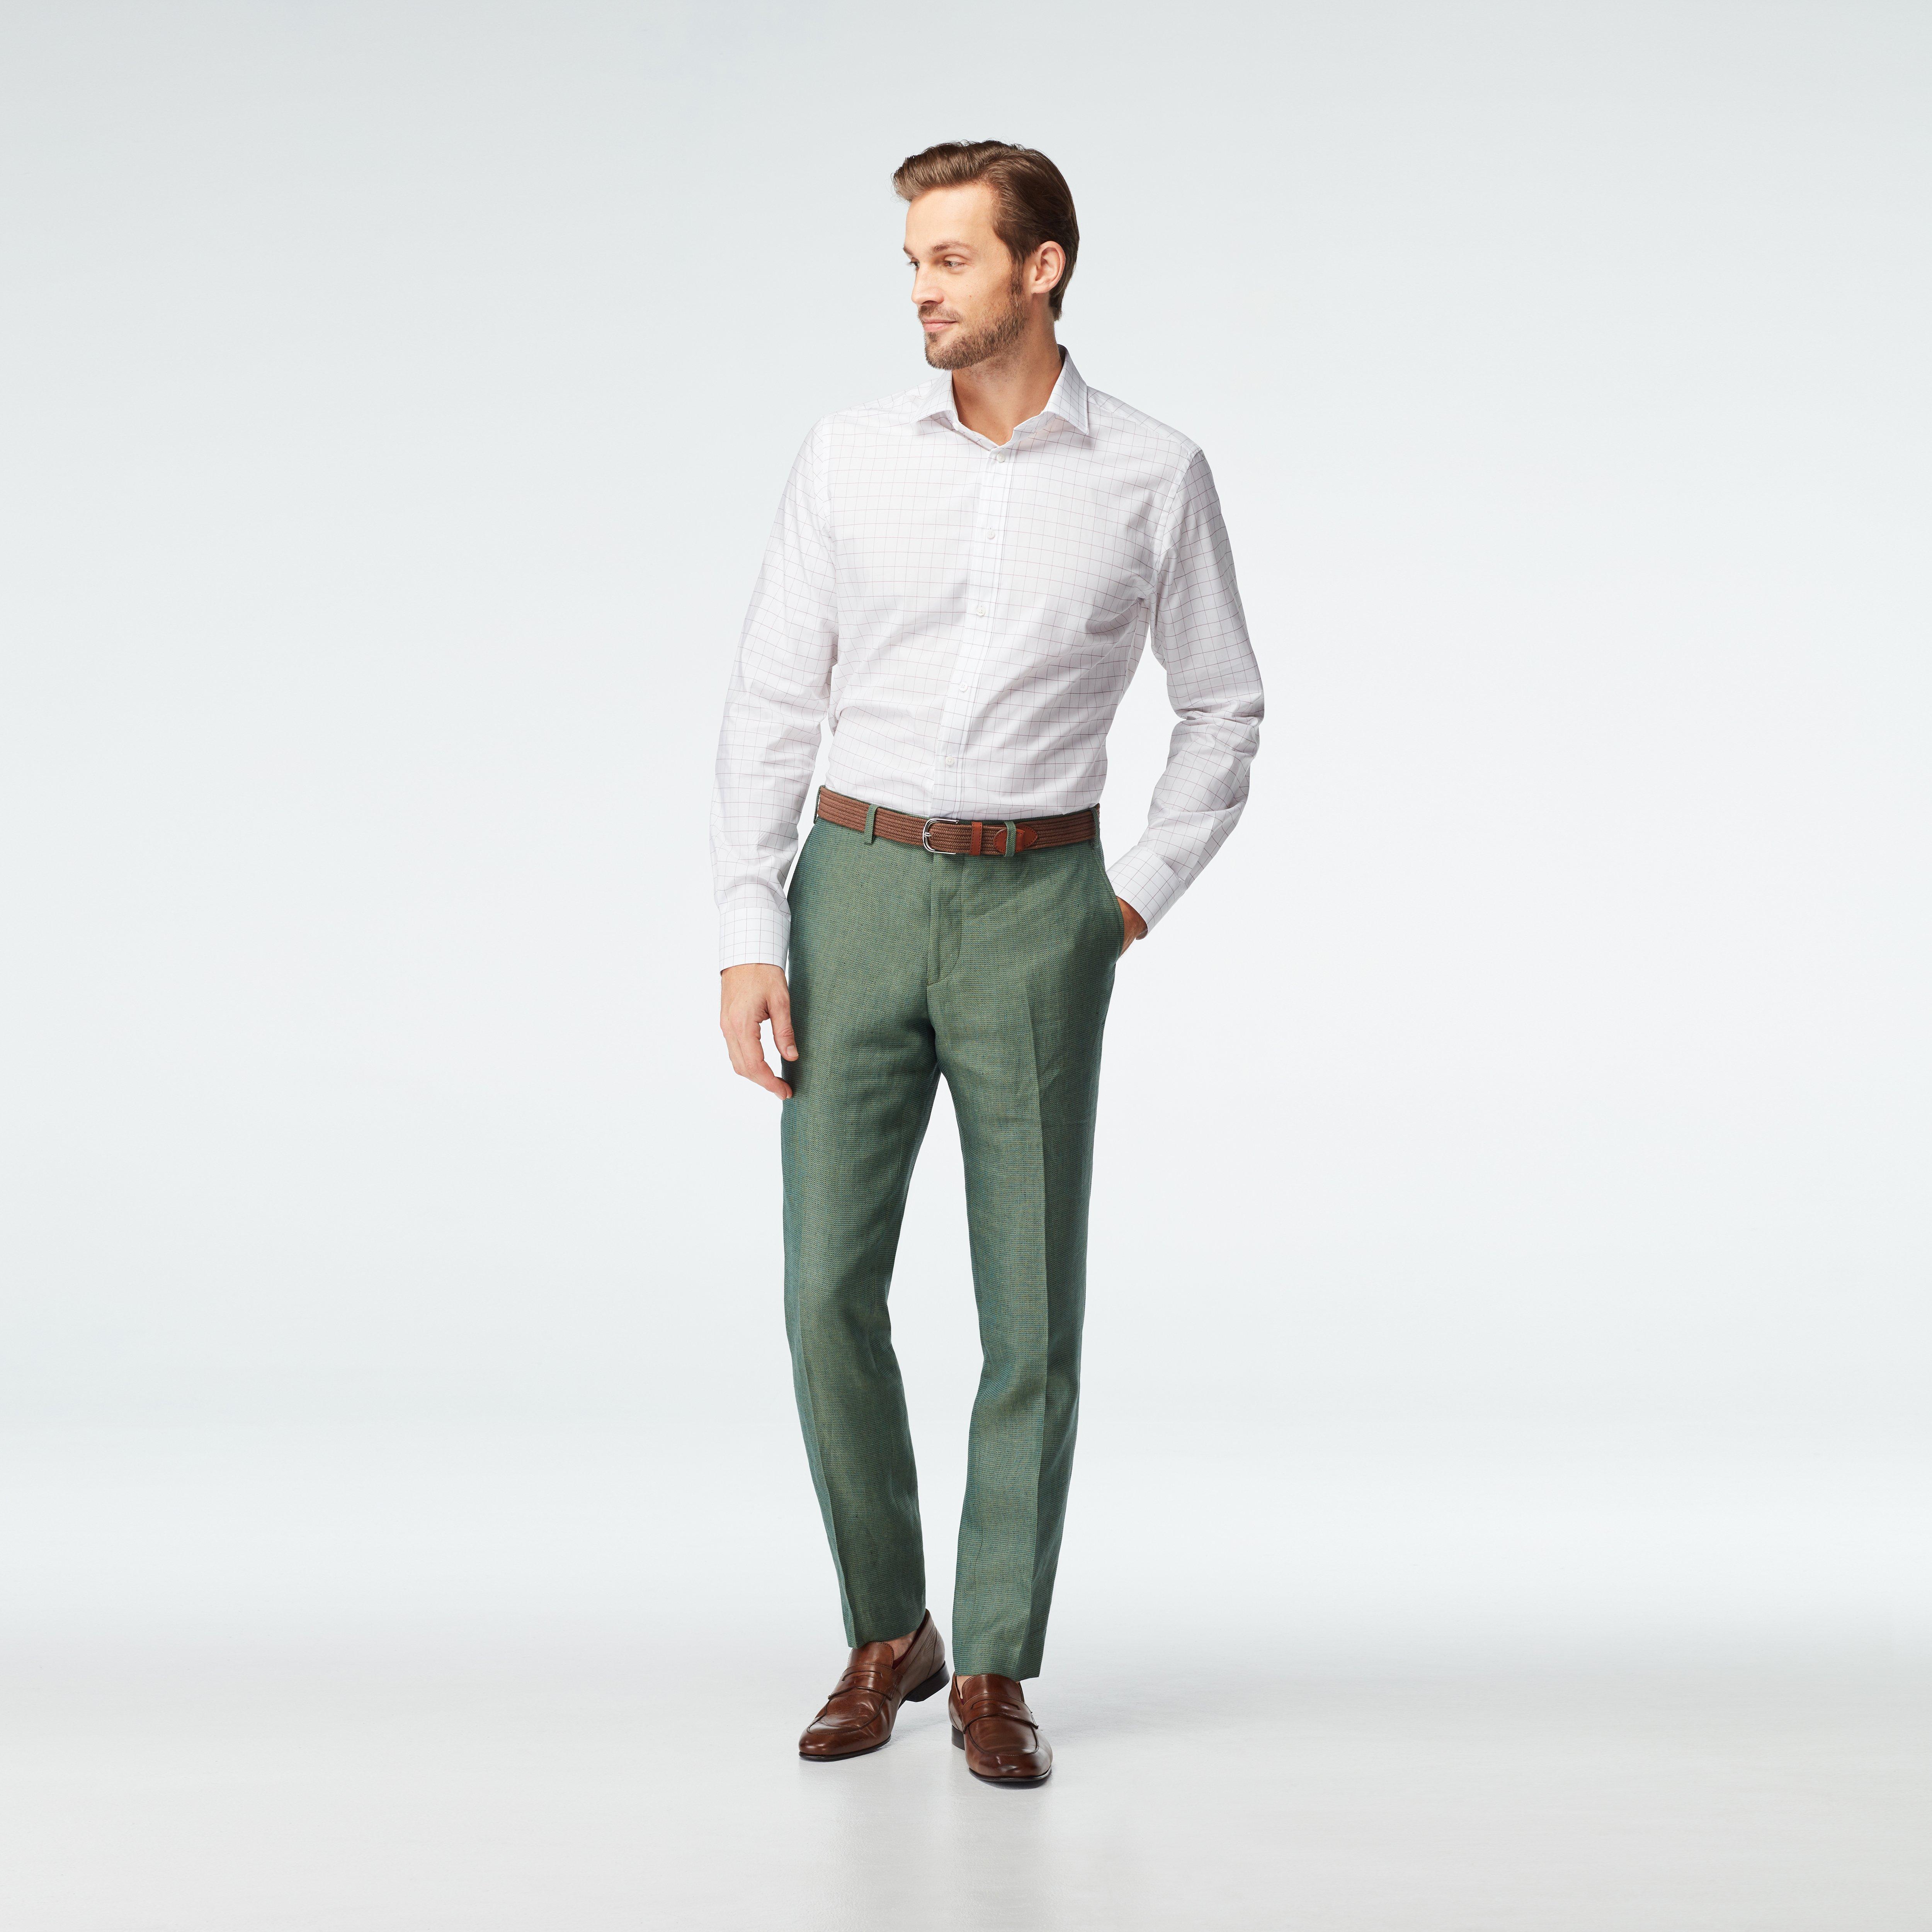 Men Light Green Formal Pants in Tirupur at best price by Prime Star  Fashions - Justdial